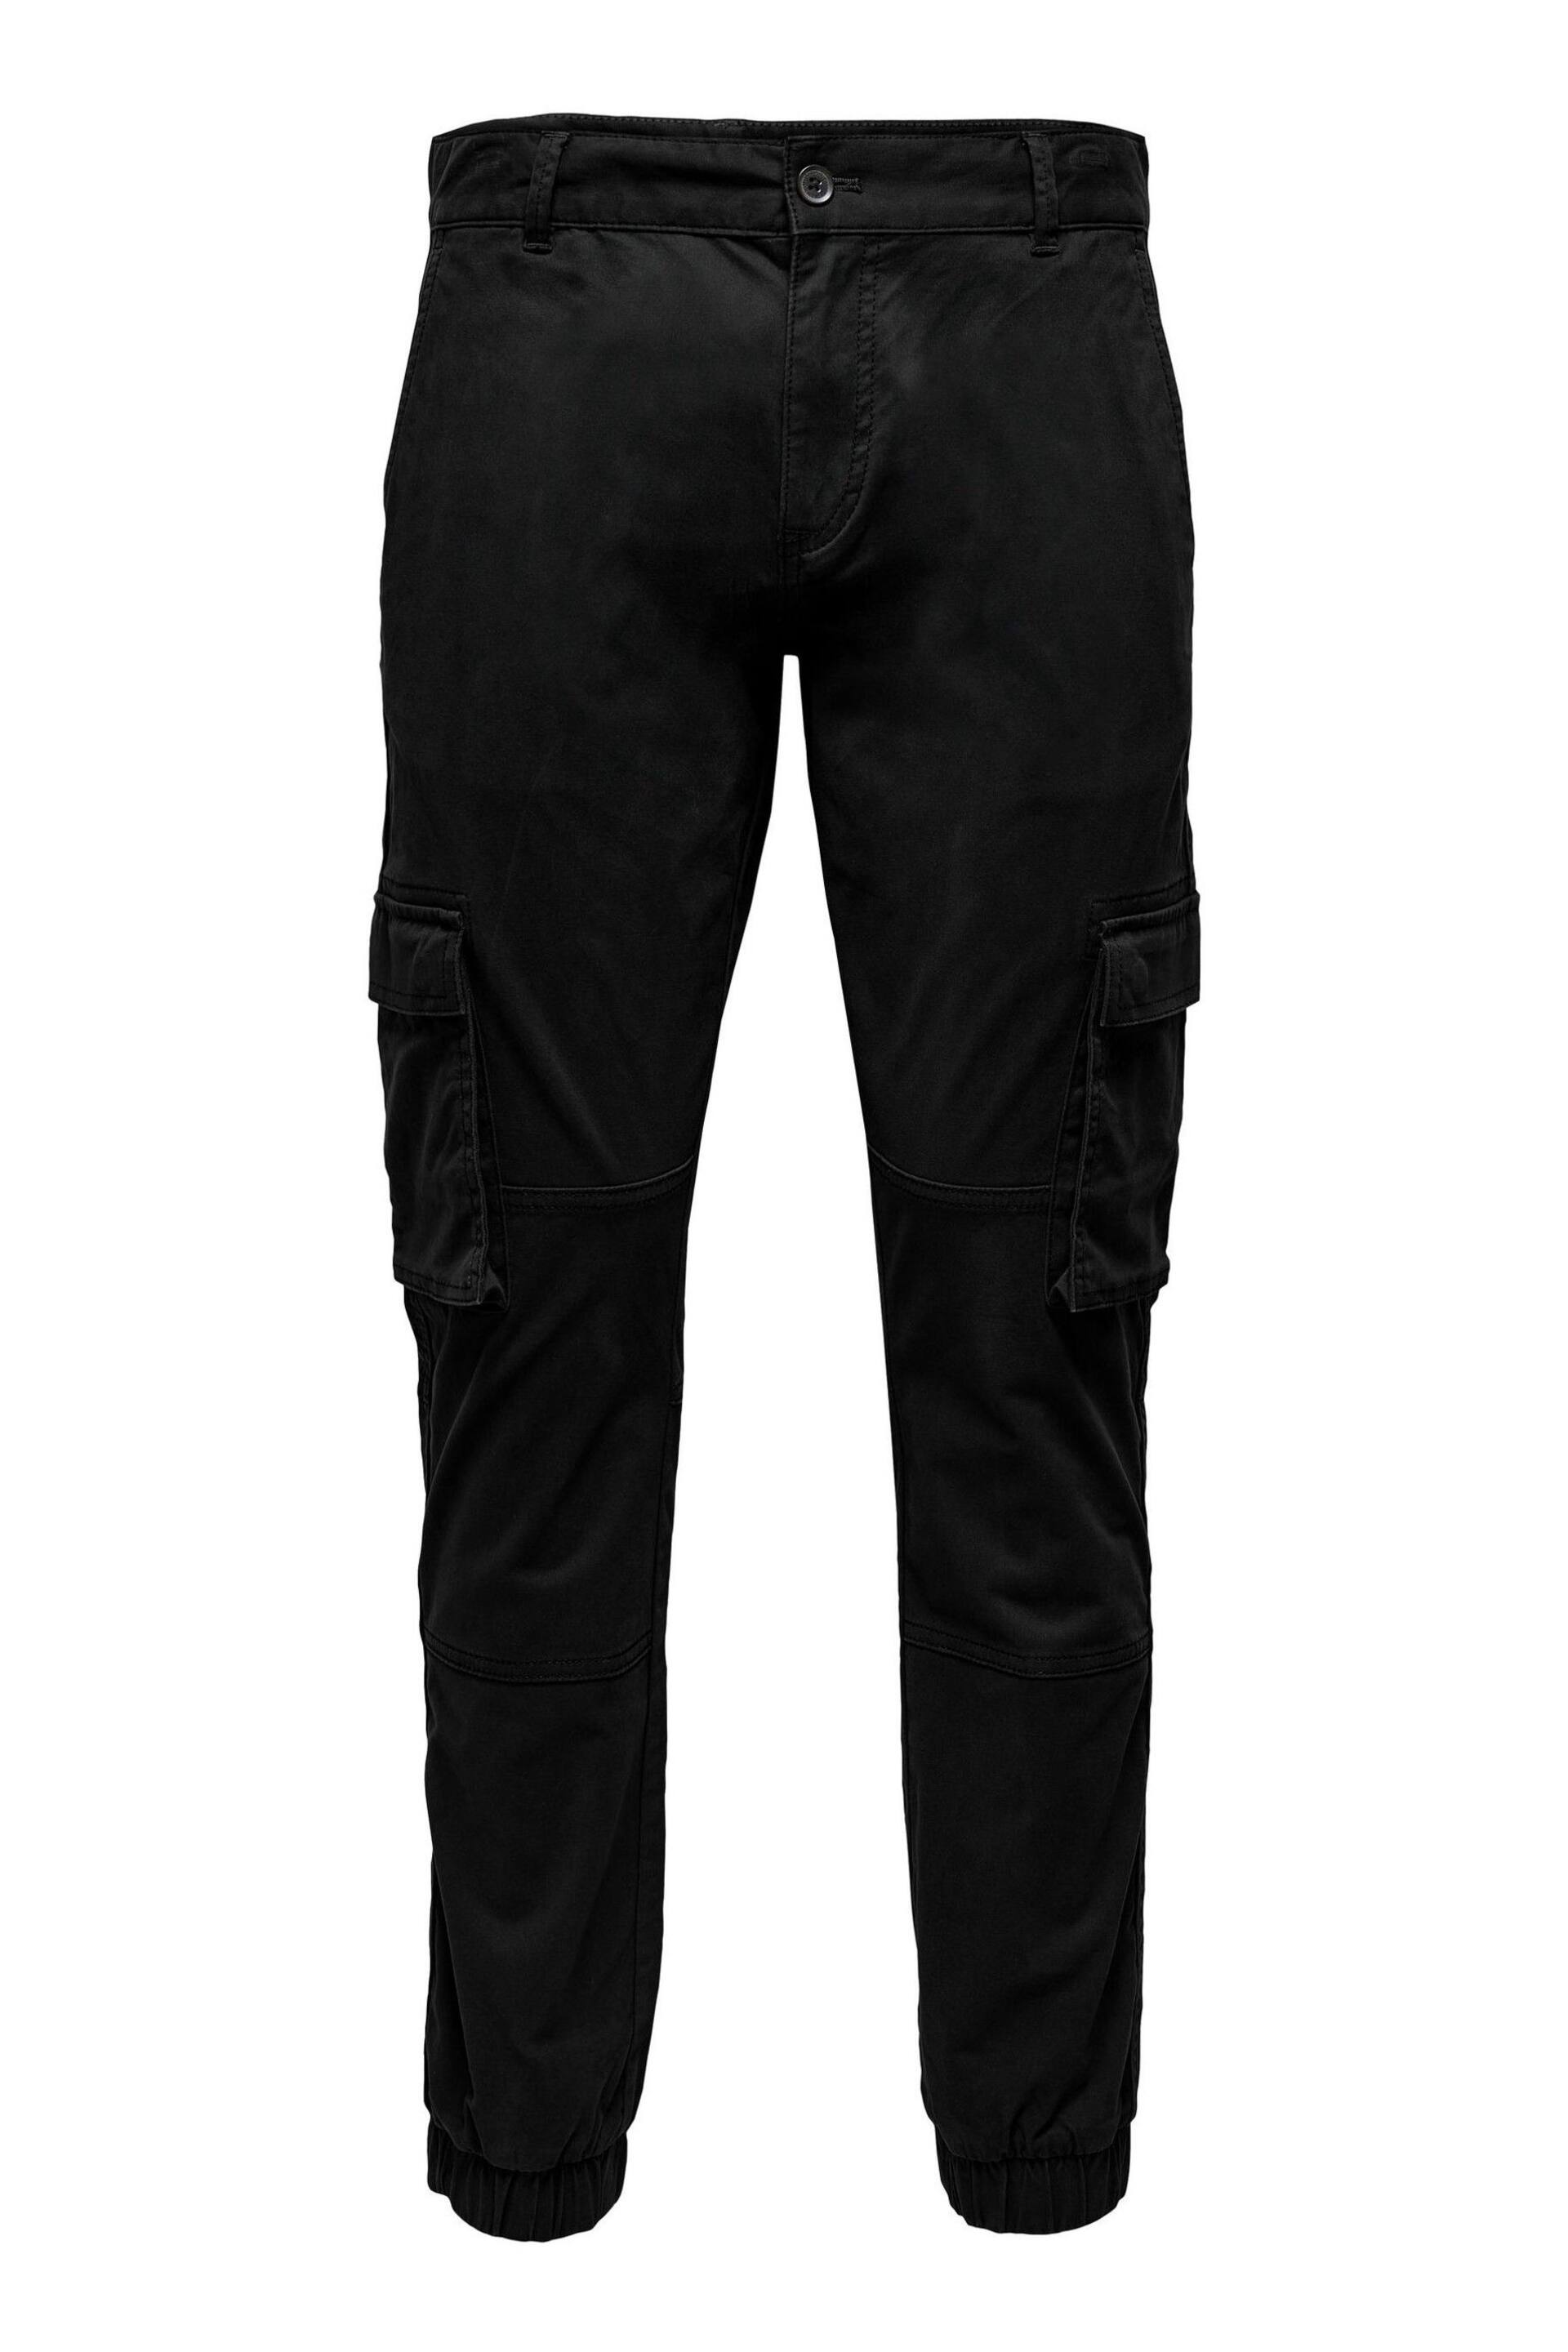 Only & Sons Black Cargo Detail Trousers with Cuffed Ankle - Image 3 of 4